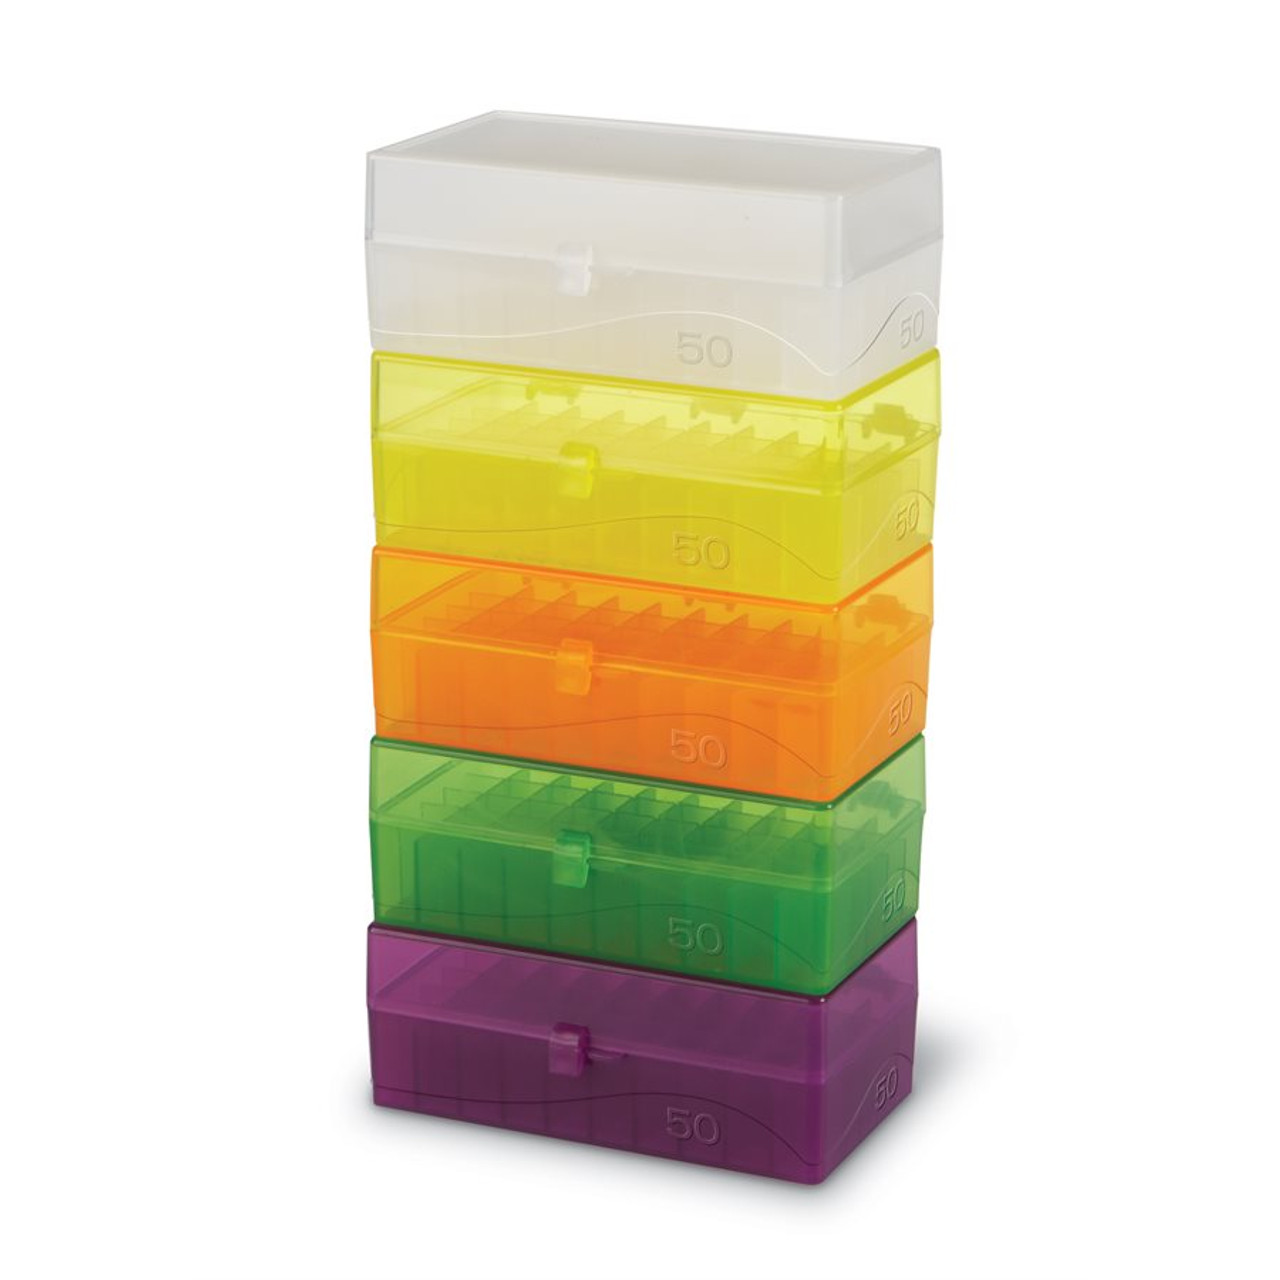 Small Plastic Bin With Dividers or Insert Trays Made to Fit